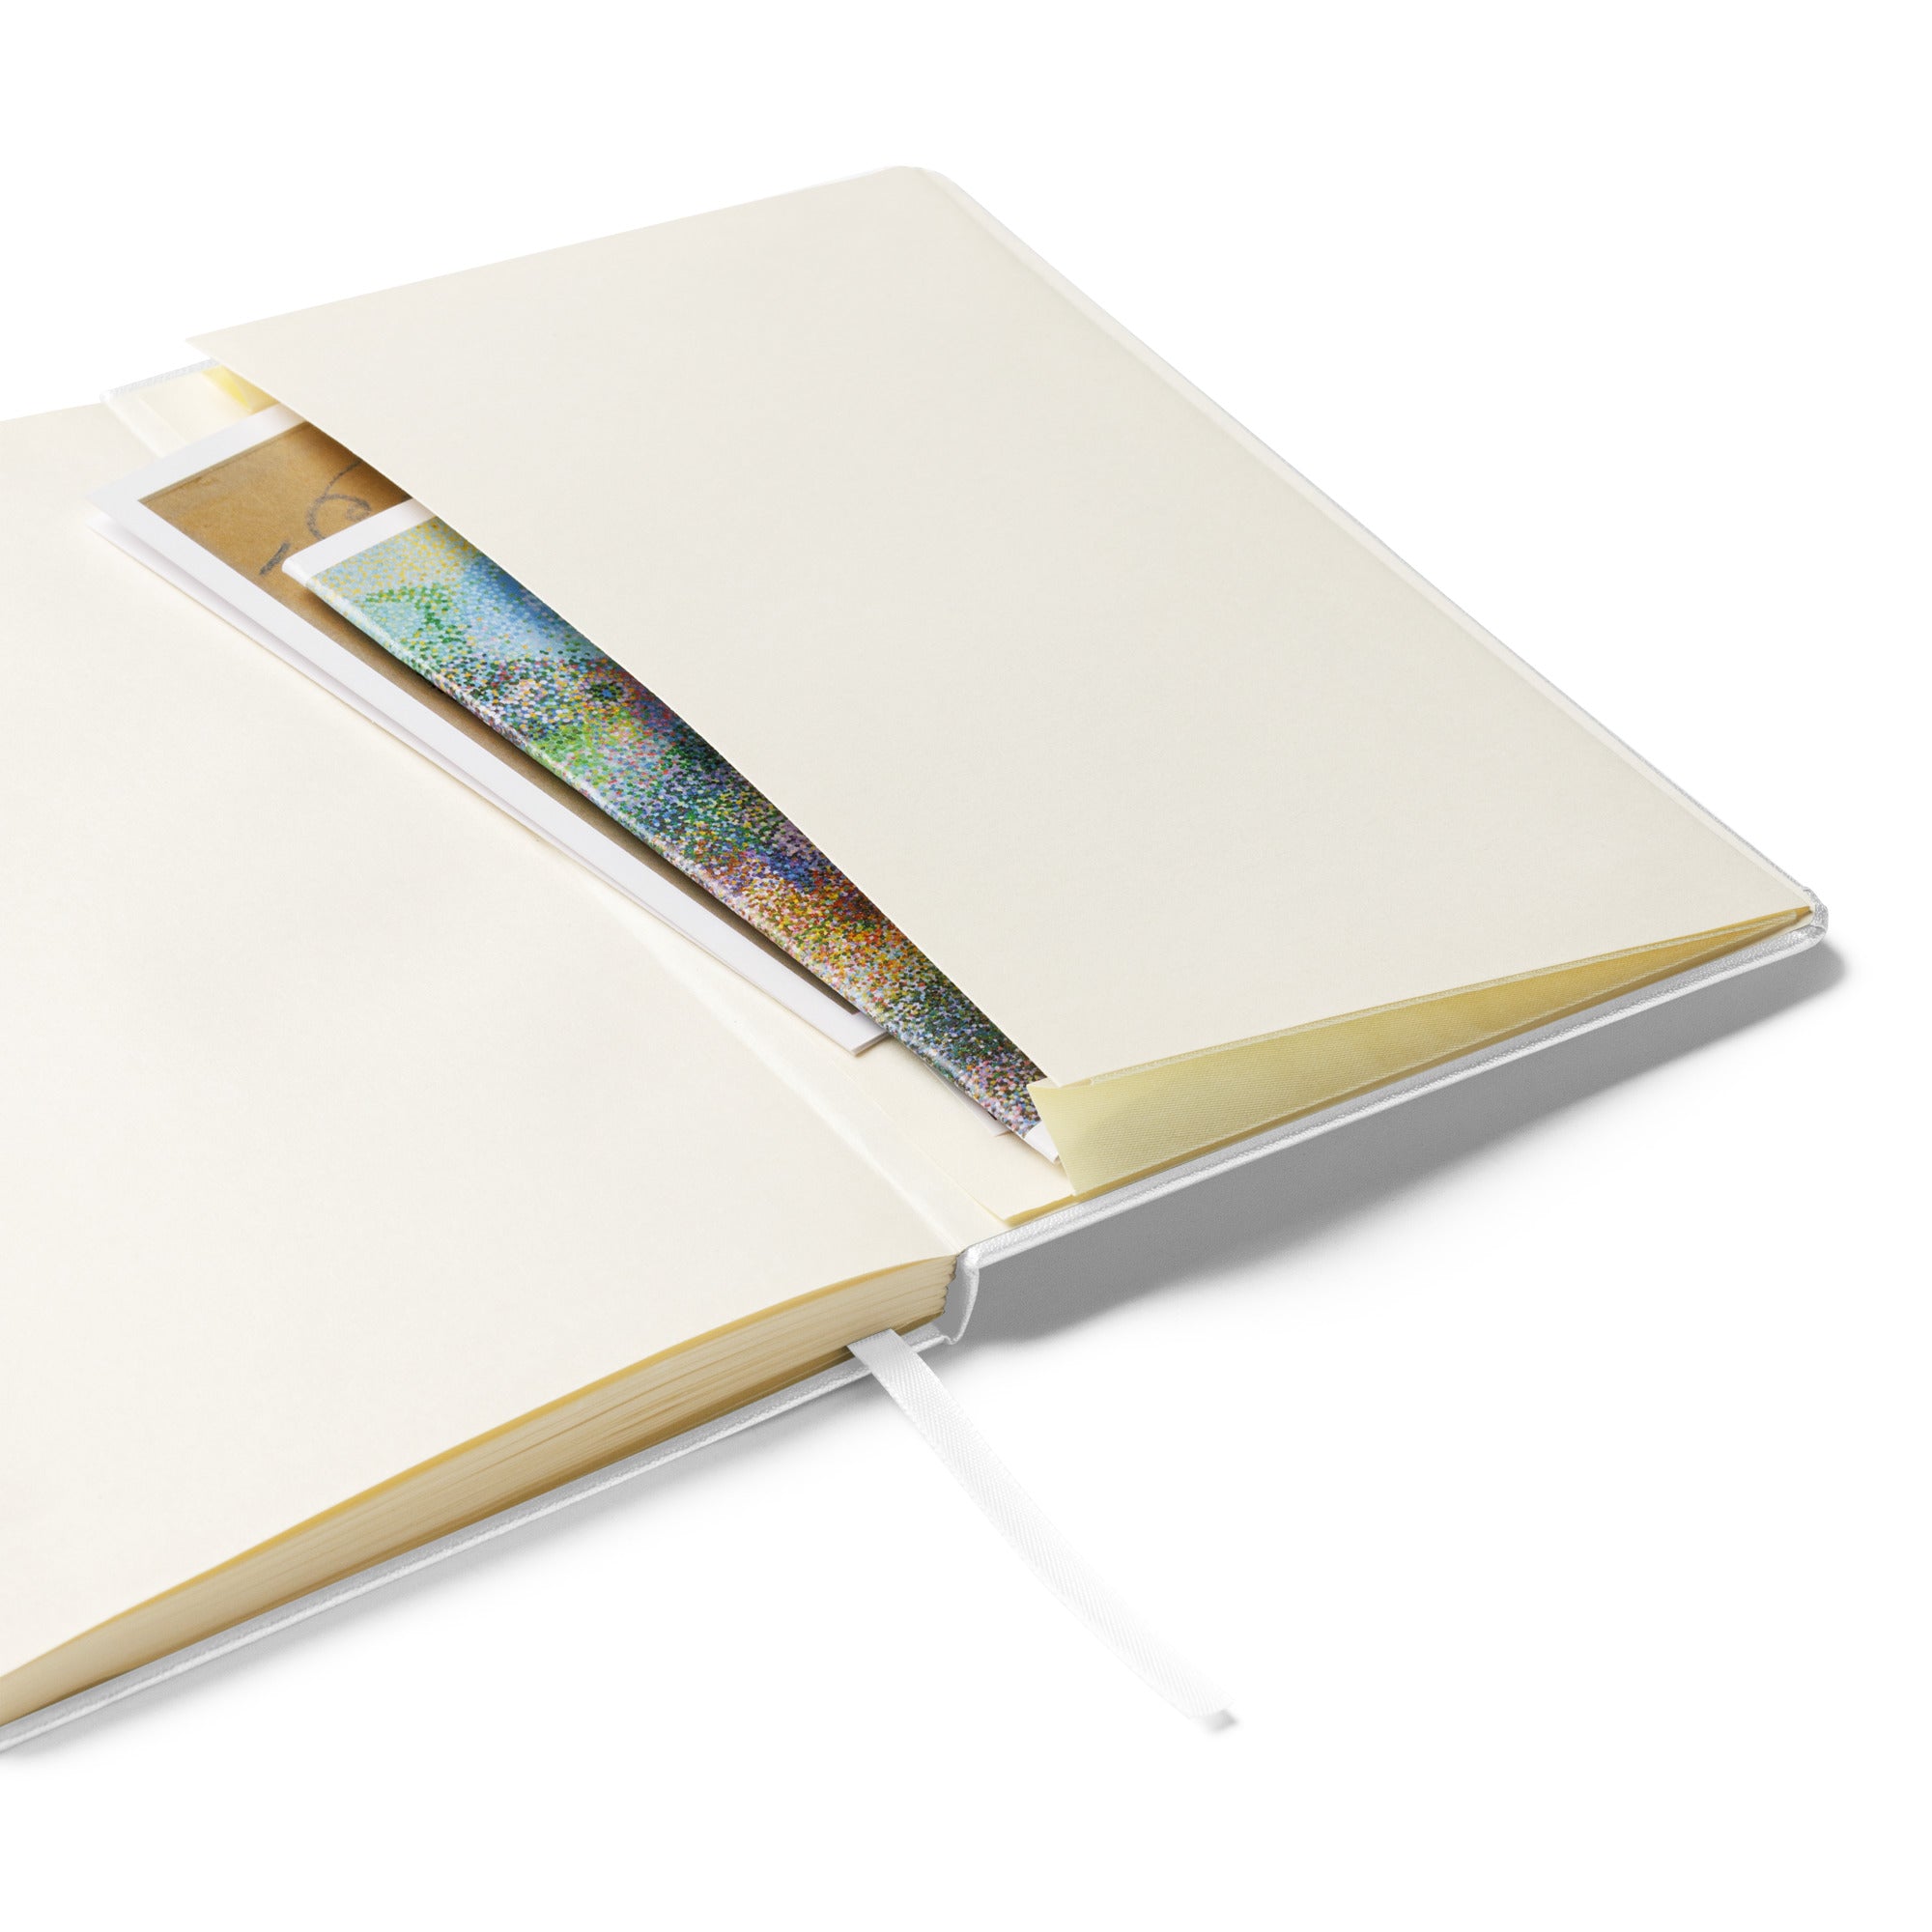 Lined paper journal